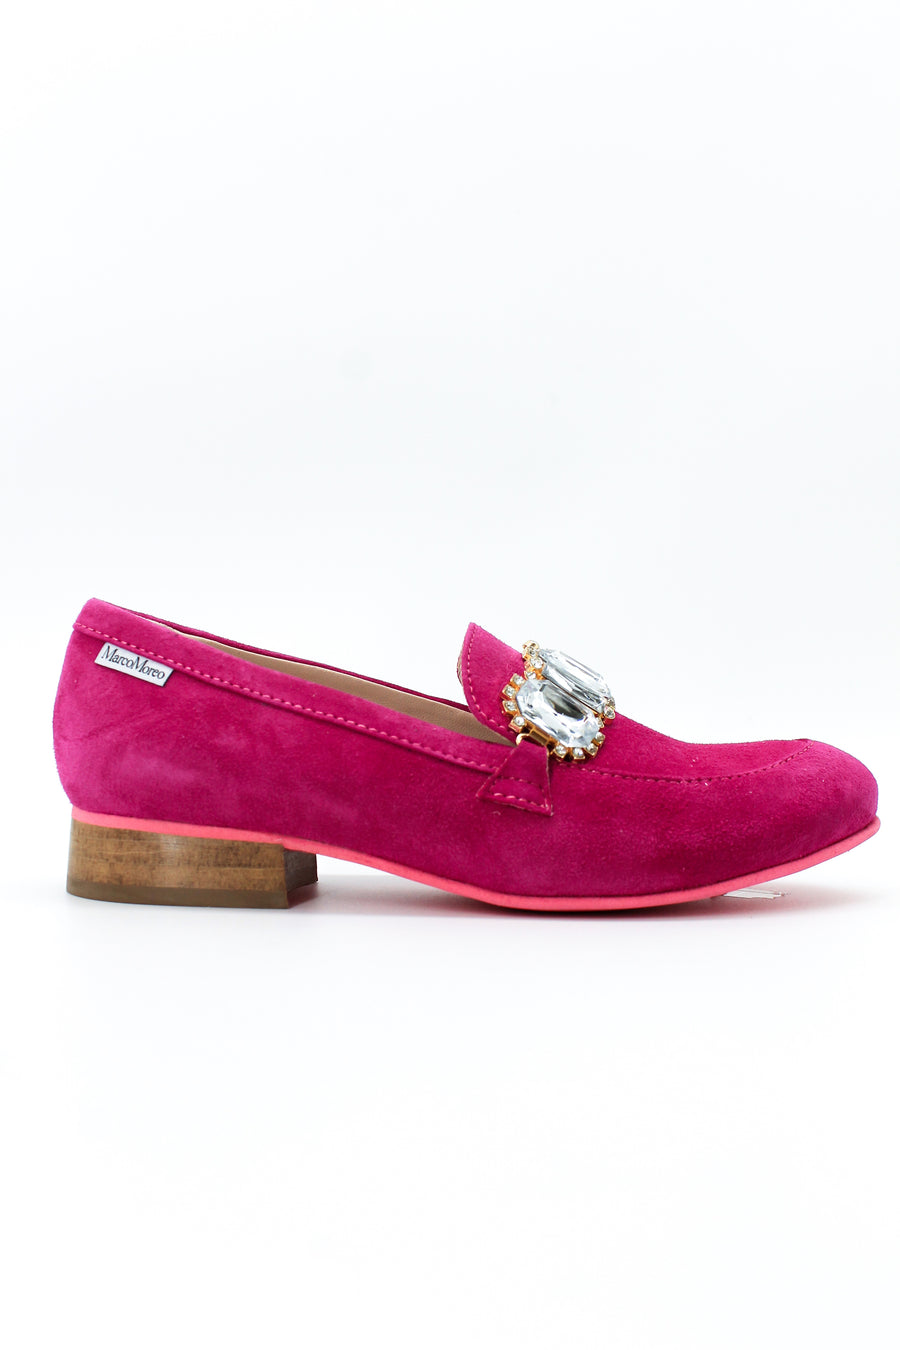 Marco Moreo 200 Pink Suede